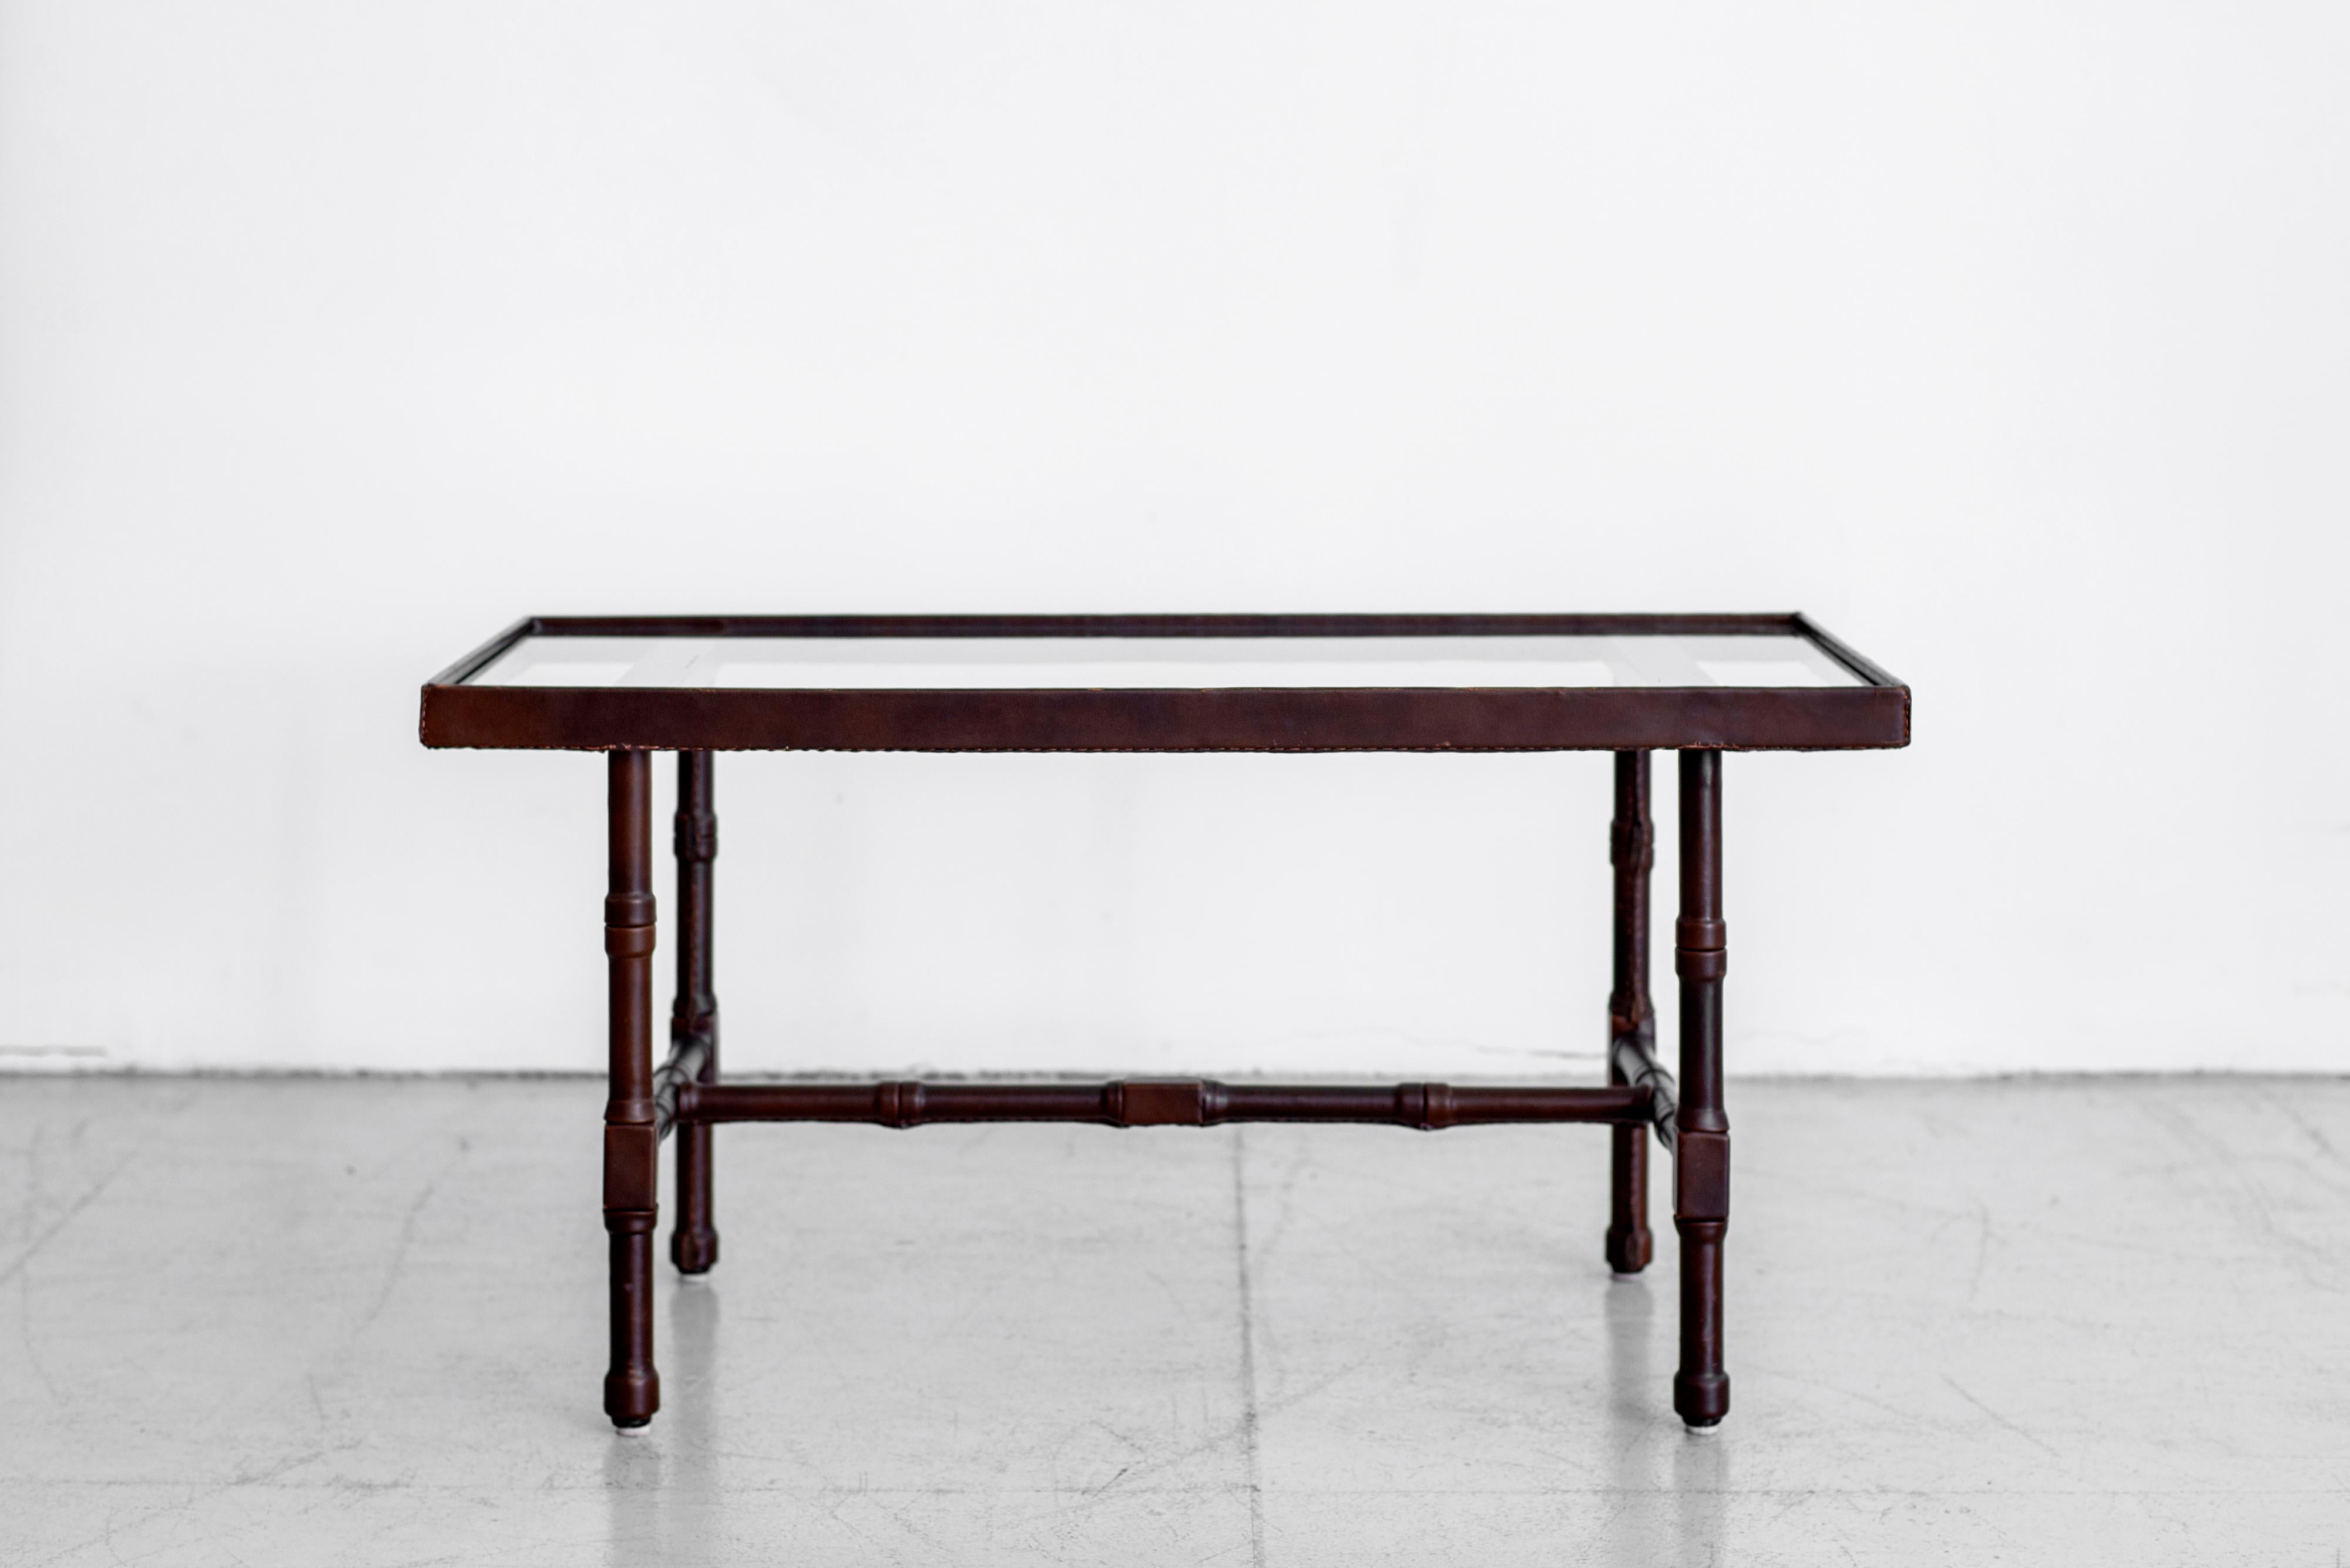 Fantastic skai leather low table with glass top by Jacques Adnet. 
Rich dark brown color leather with nice patina.